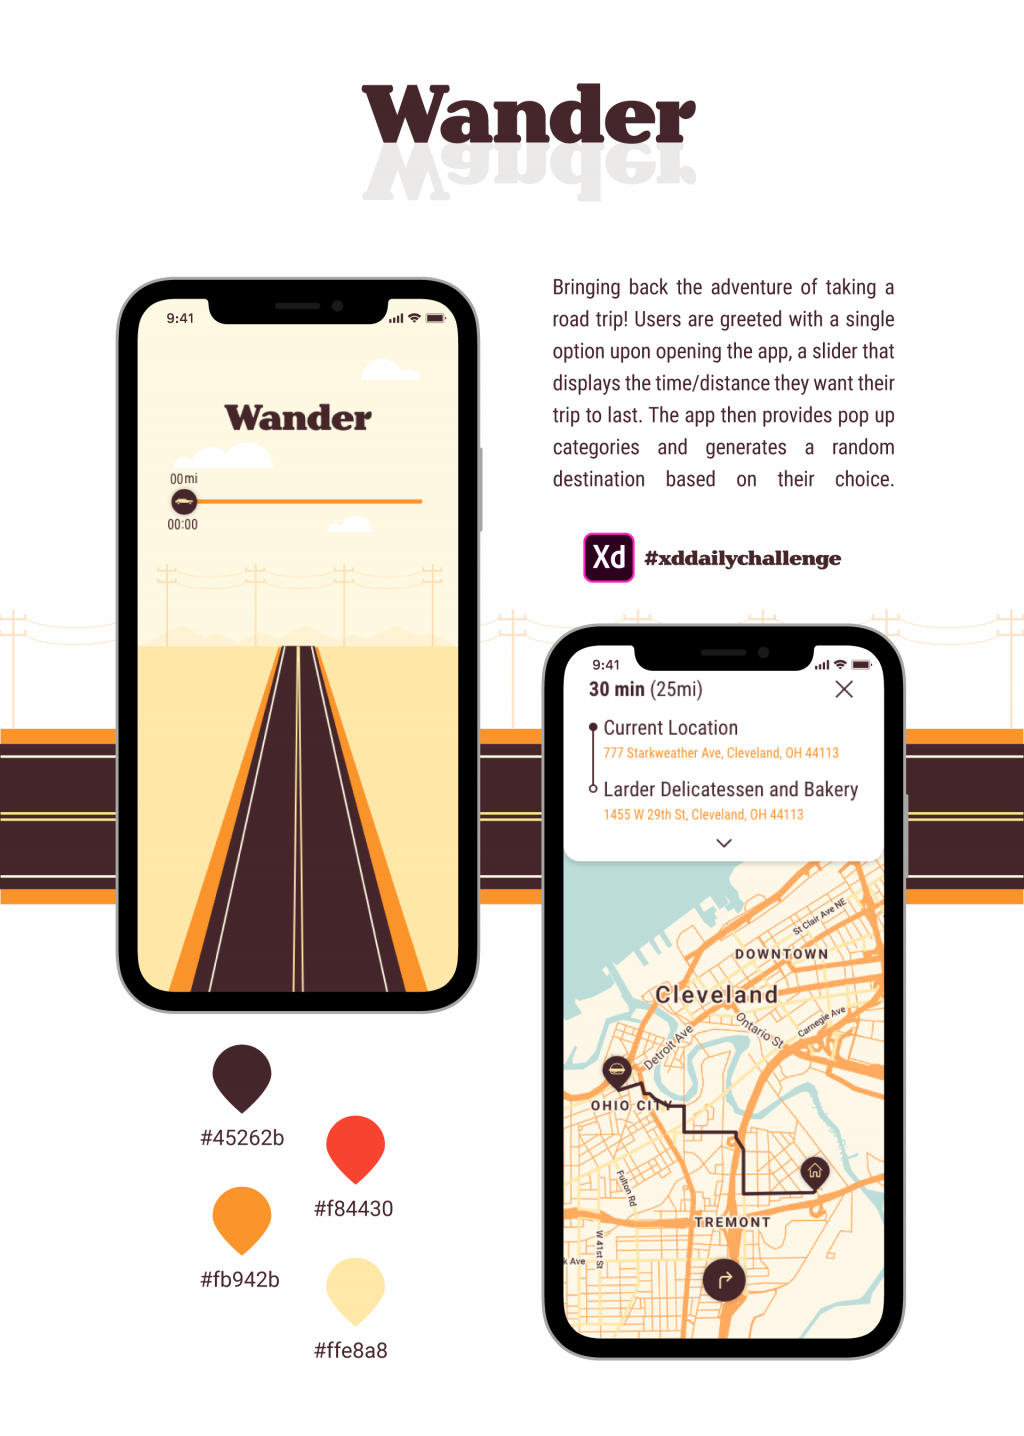 Mockup for a design for a road trip app.